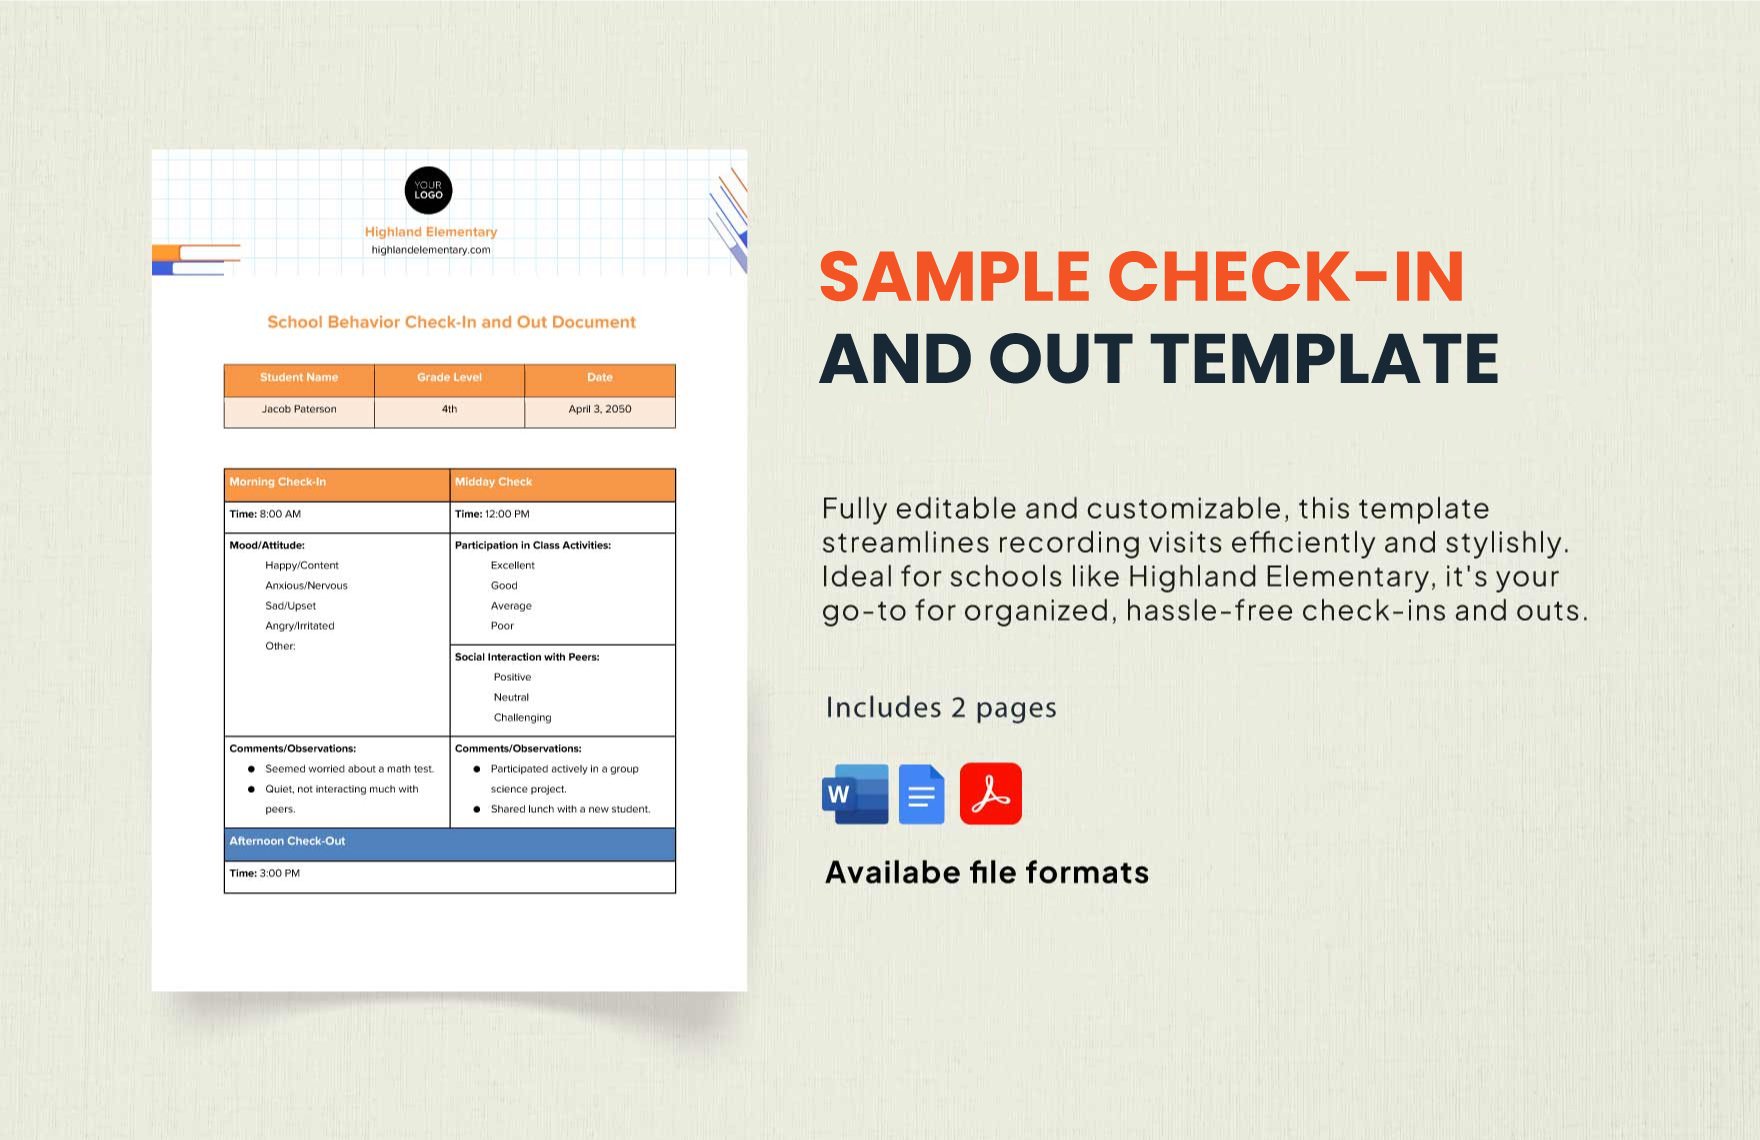 Free Sample Check-in and Out Template